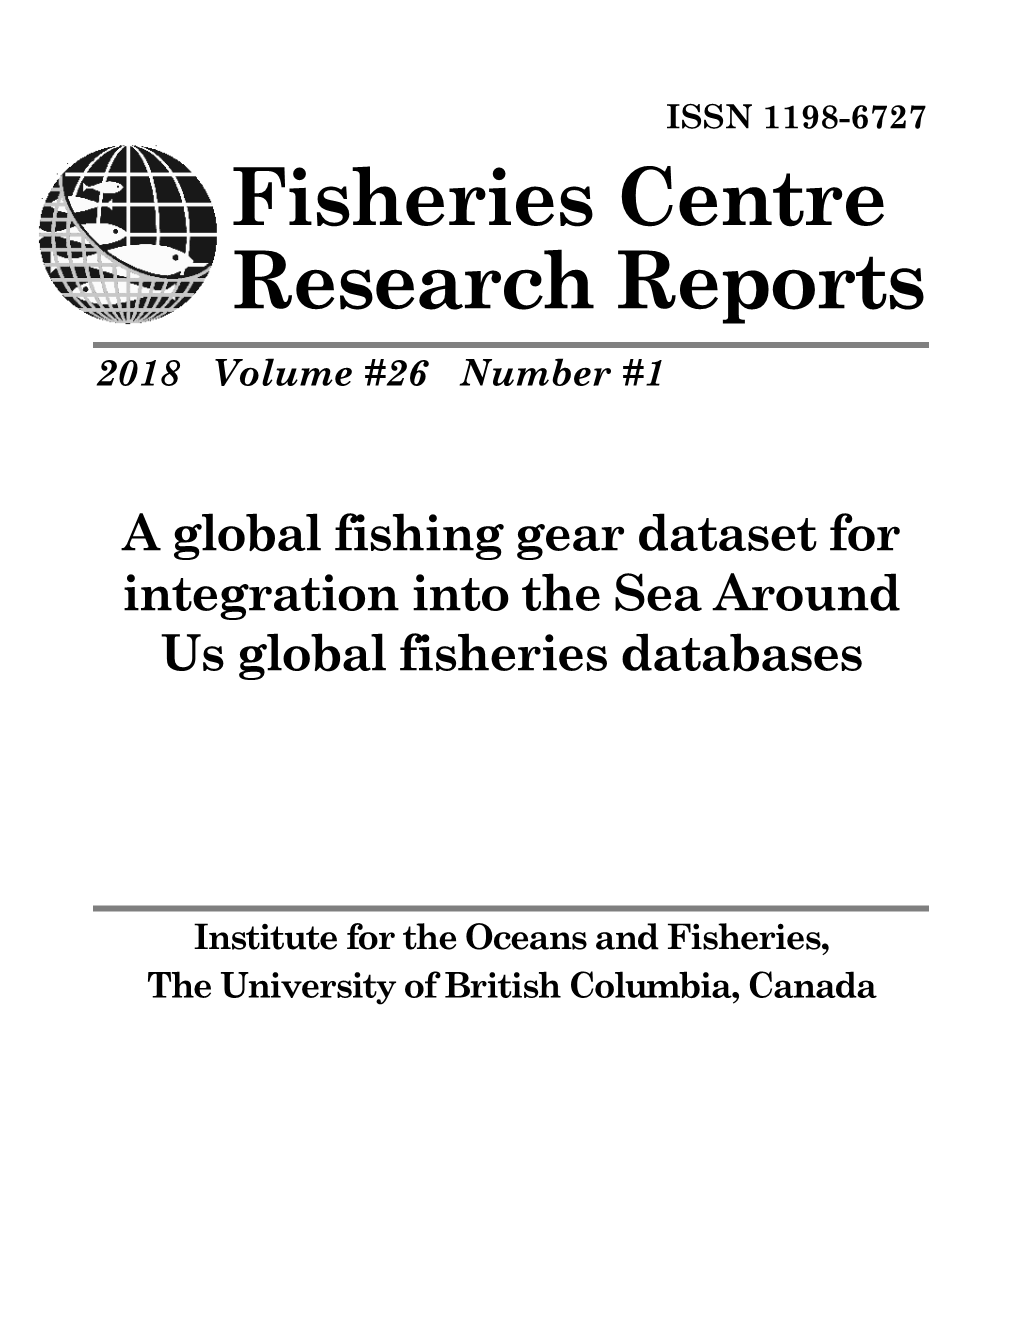 Fisheries Centre Research Reports 2018 Volume #26 Number #1